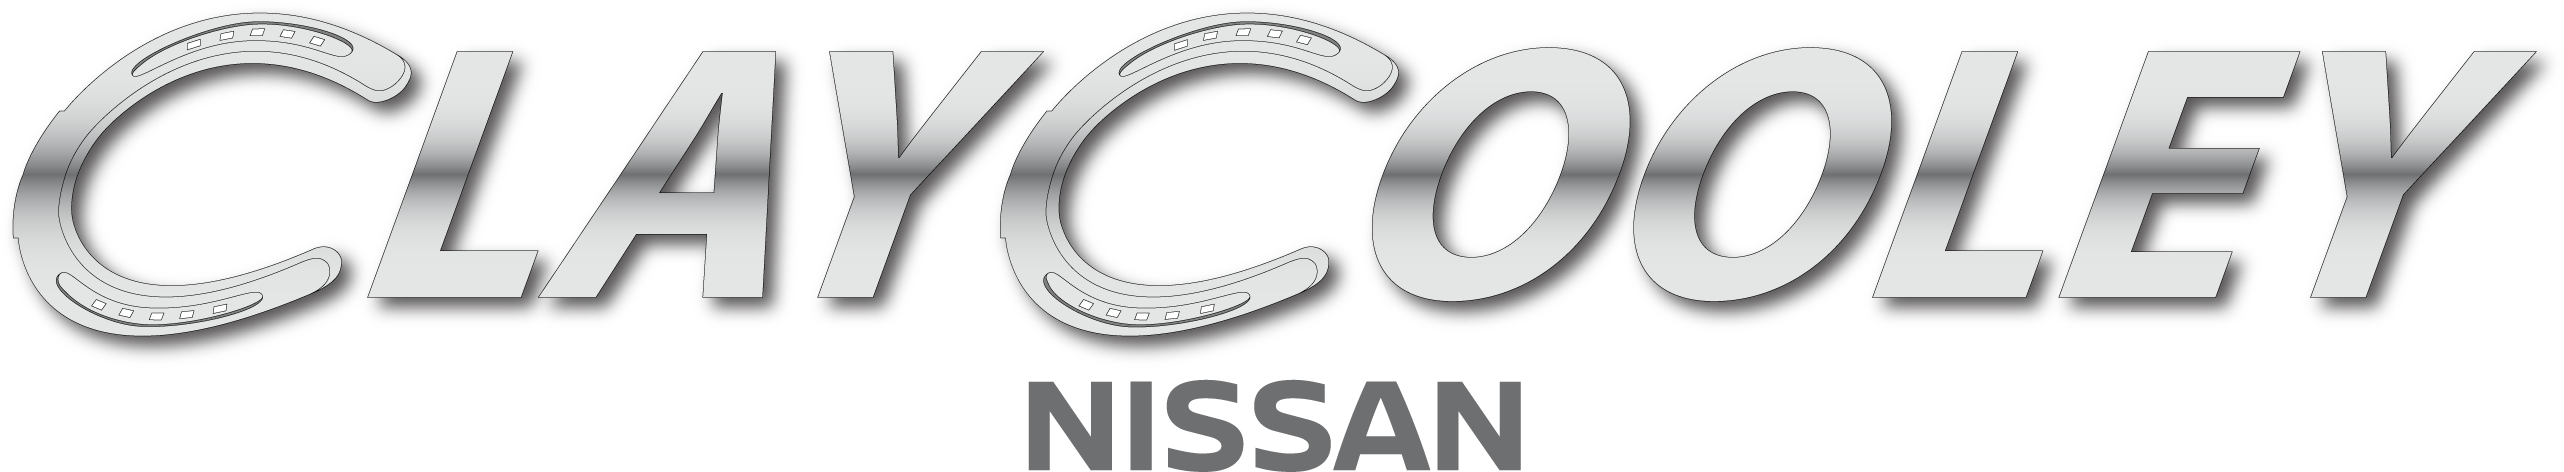 Clay Cooley Nissan - Clay Cooley Nissan Galleria Logo (2926x864), Png Download